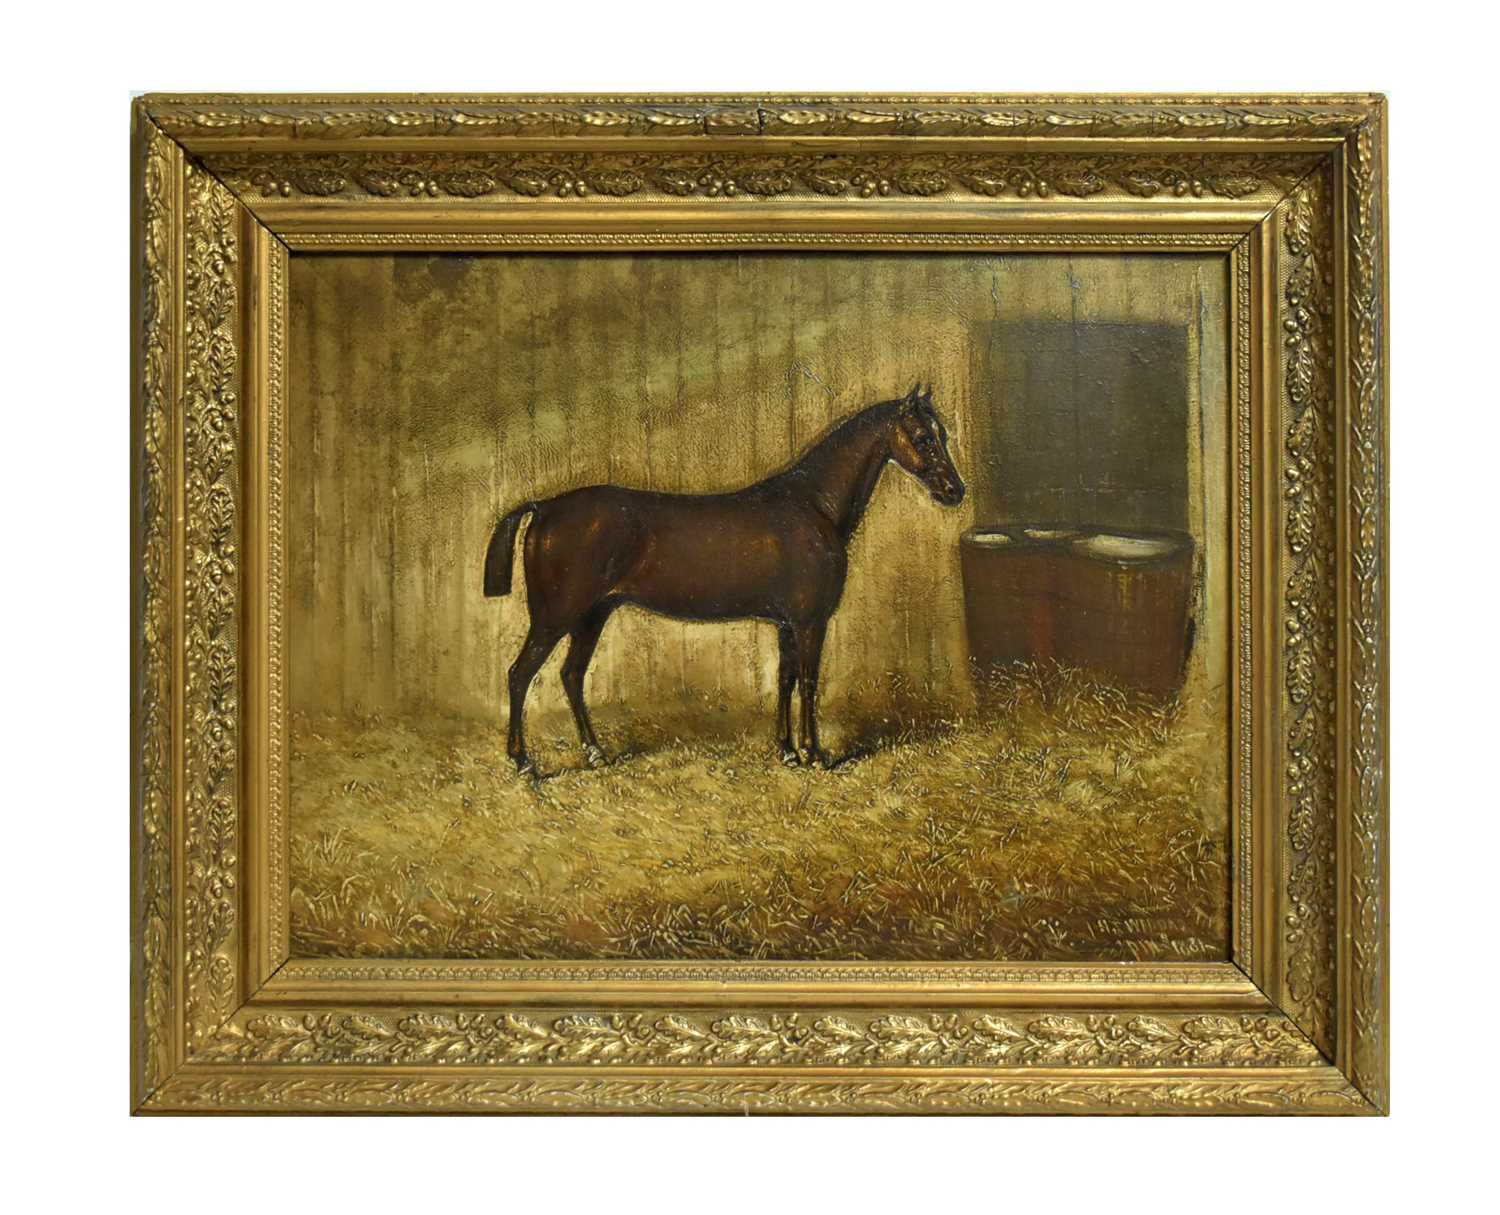 Lot 795 - H. T. Widdas - Portrait of a Chestnut Racehorse in a Stable | oil